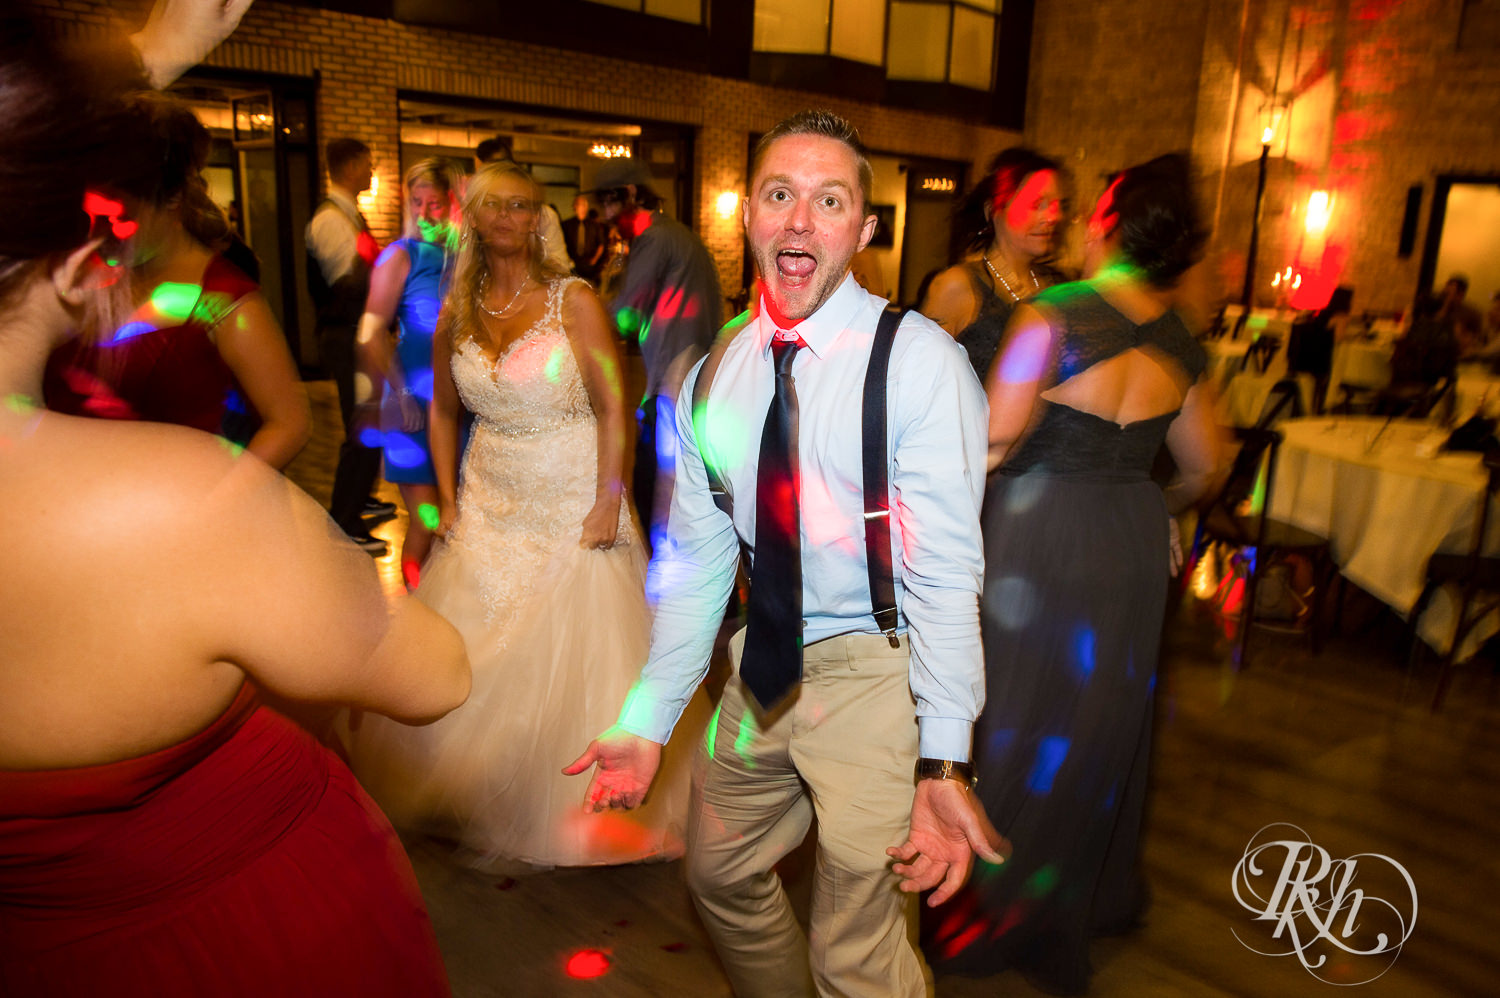 Guests dance at wedding reception at the Lumber Exchange Event Center in Minneapolis, Minnesota.